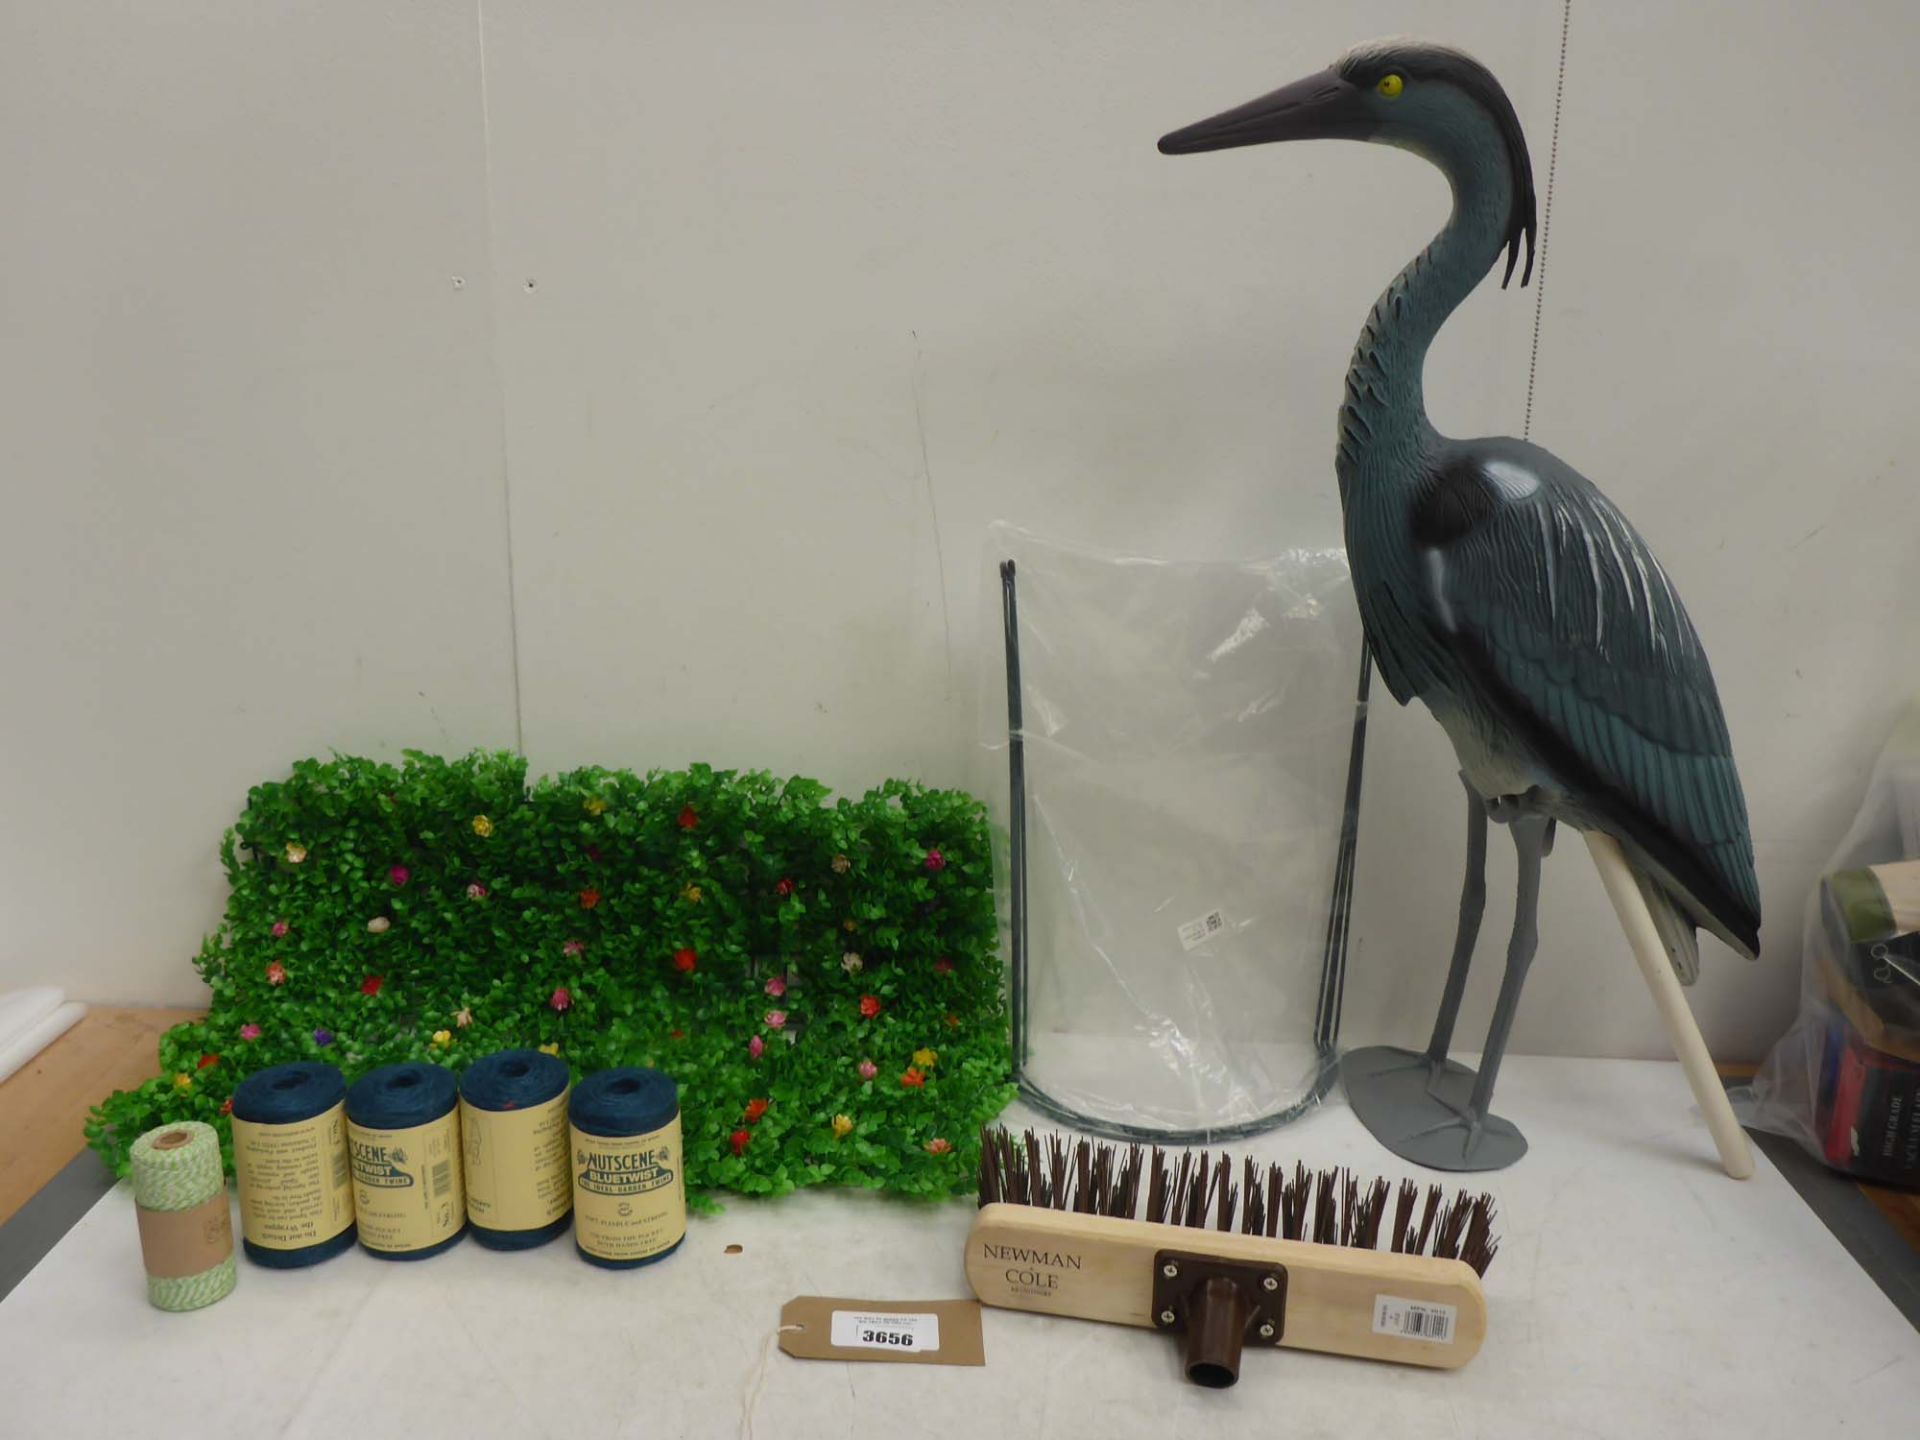 Fish pond Heron decoy, Newman & Cole brush head, garden twine, privacy screen and plant trainers